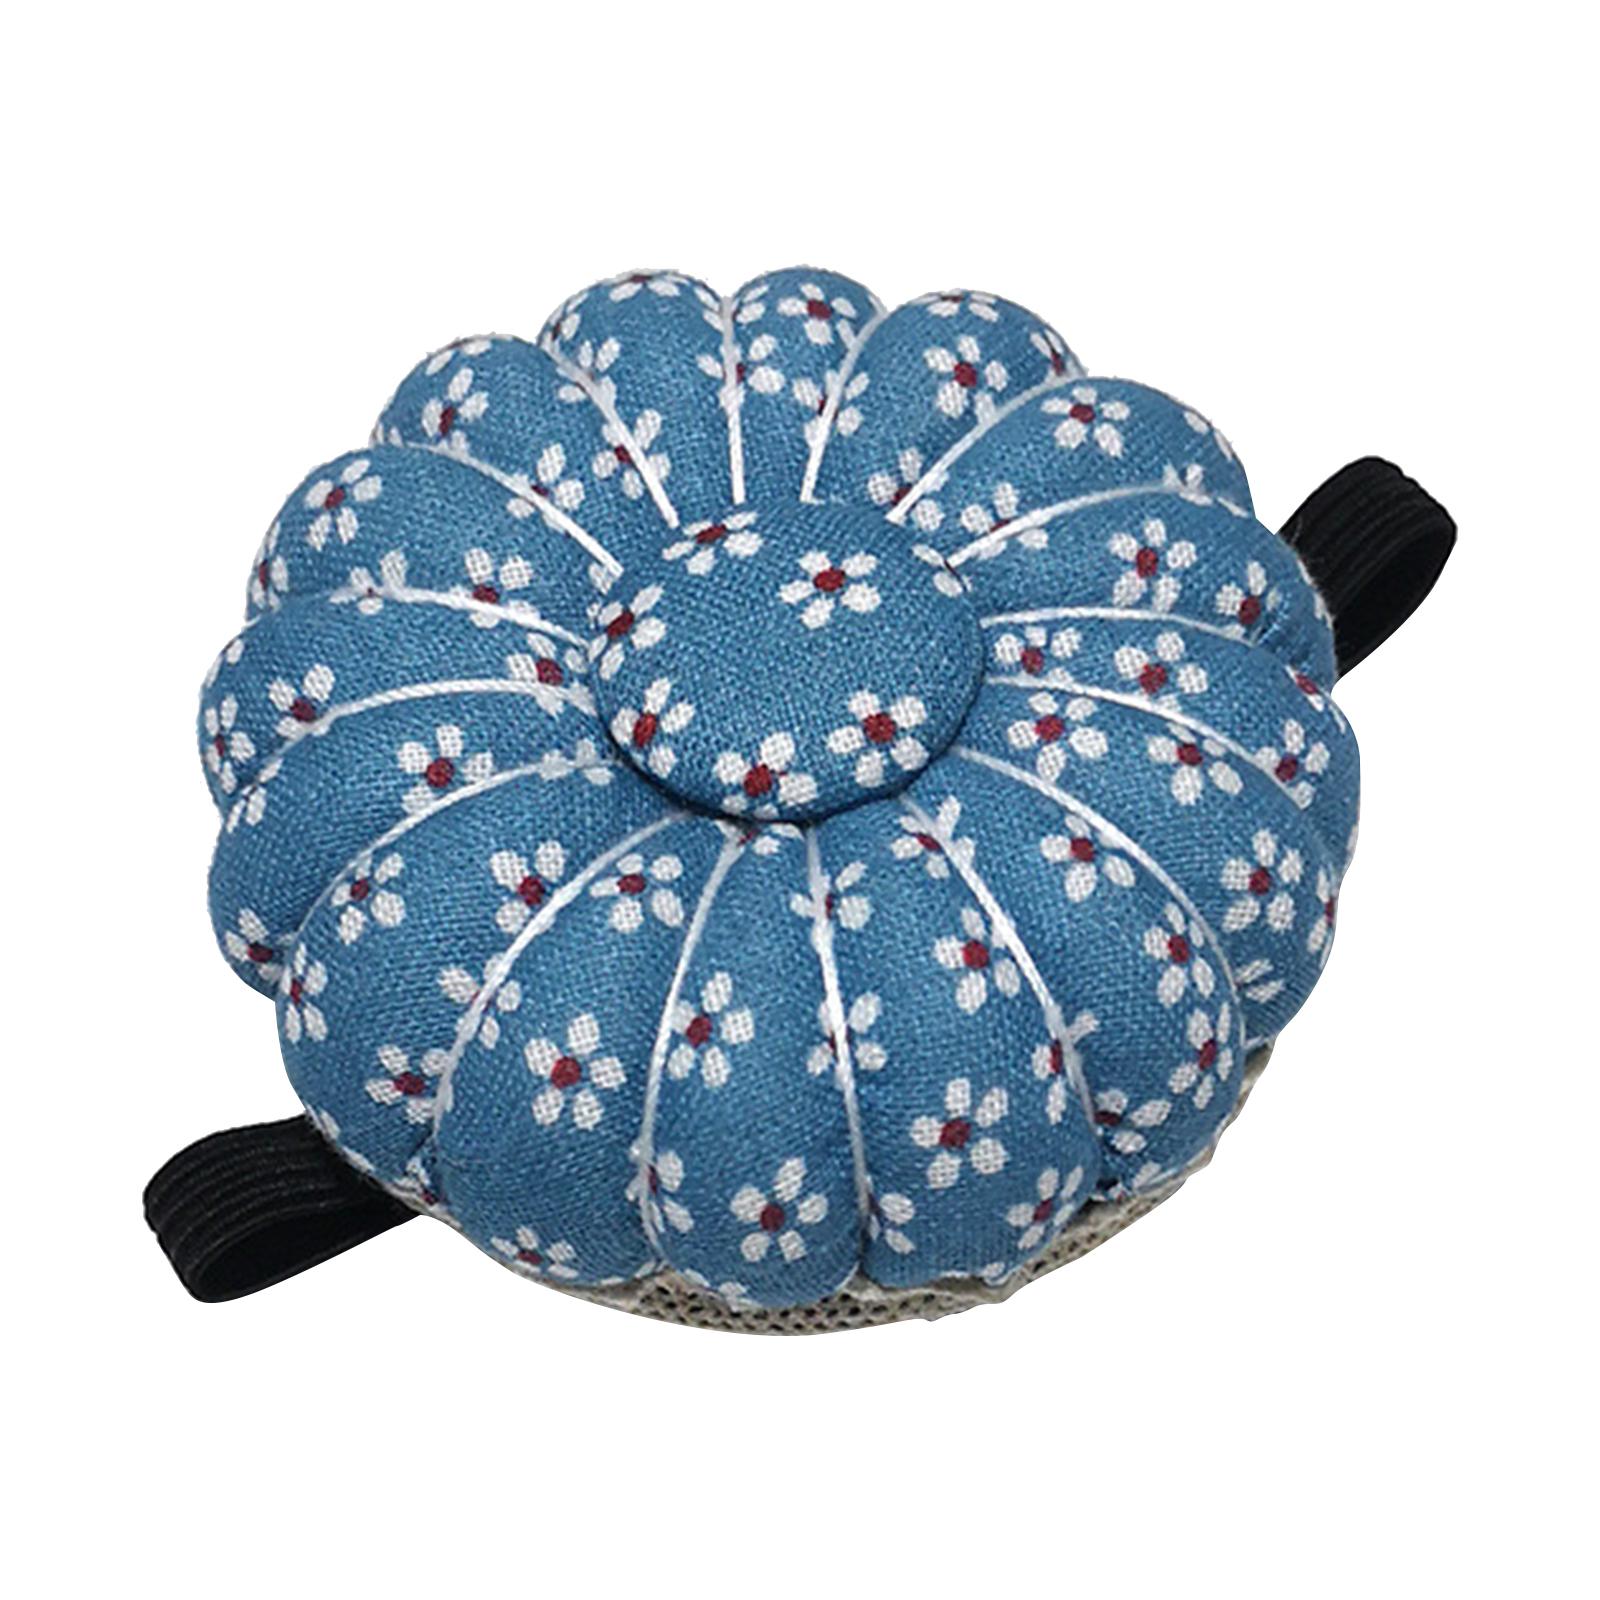 Wrist Sewing Pincushion Pin Holder with Wristband Cushion Sewing Pin Holder  for Sewing Hand Sewing Supplies Blue